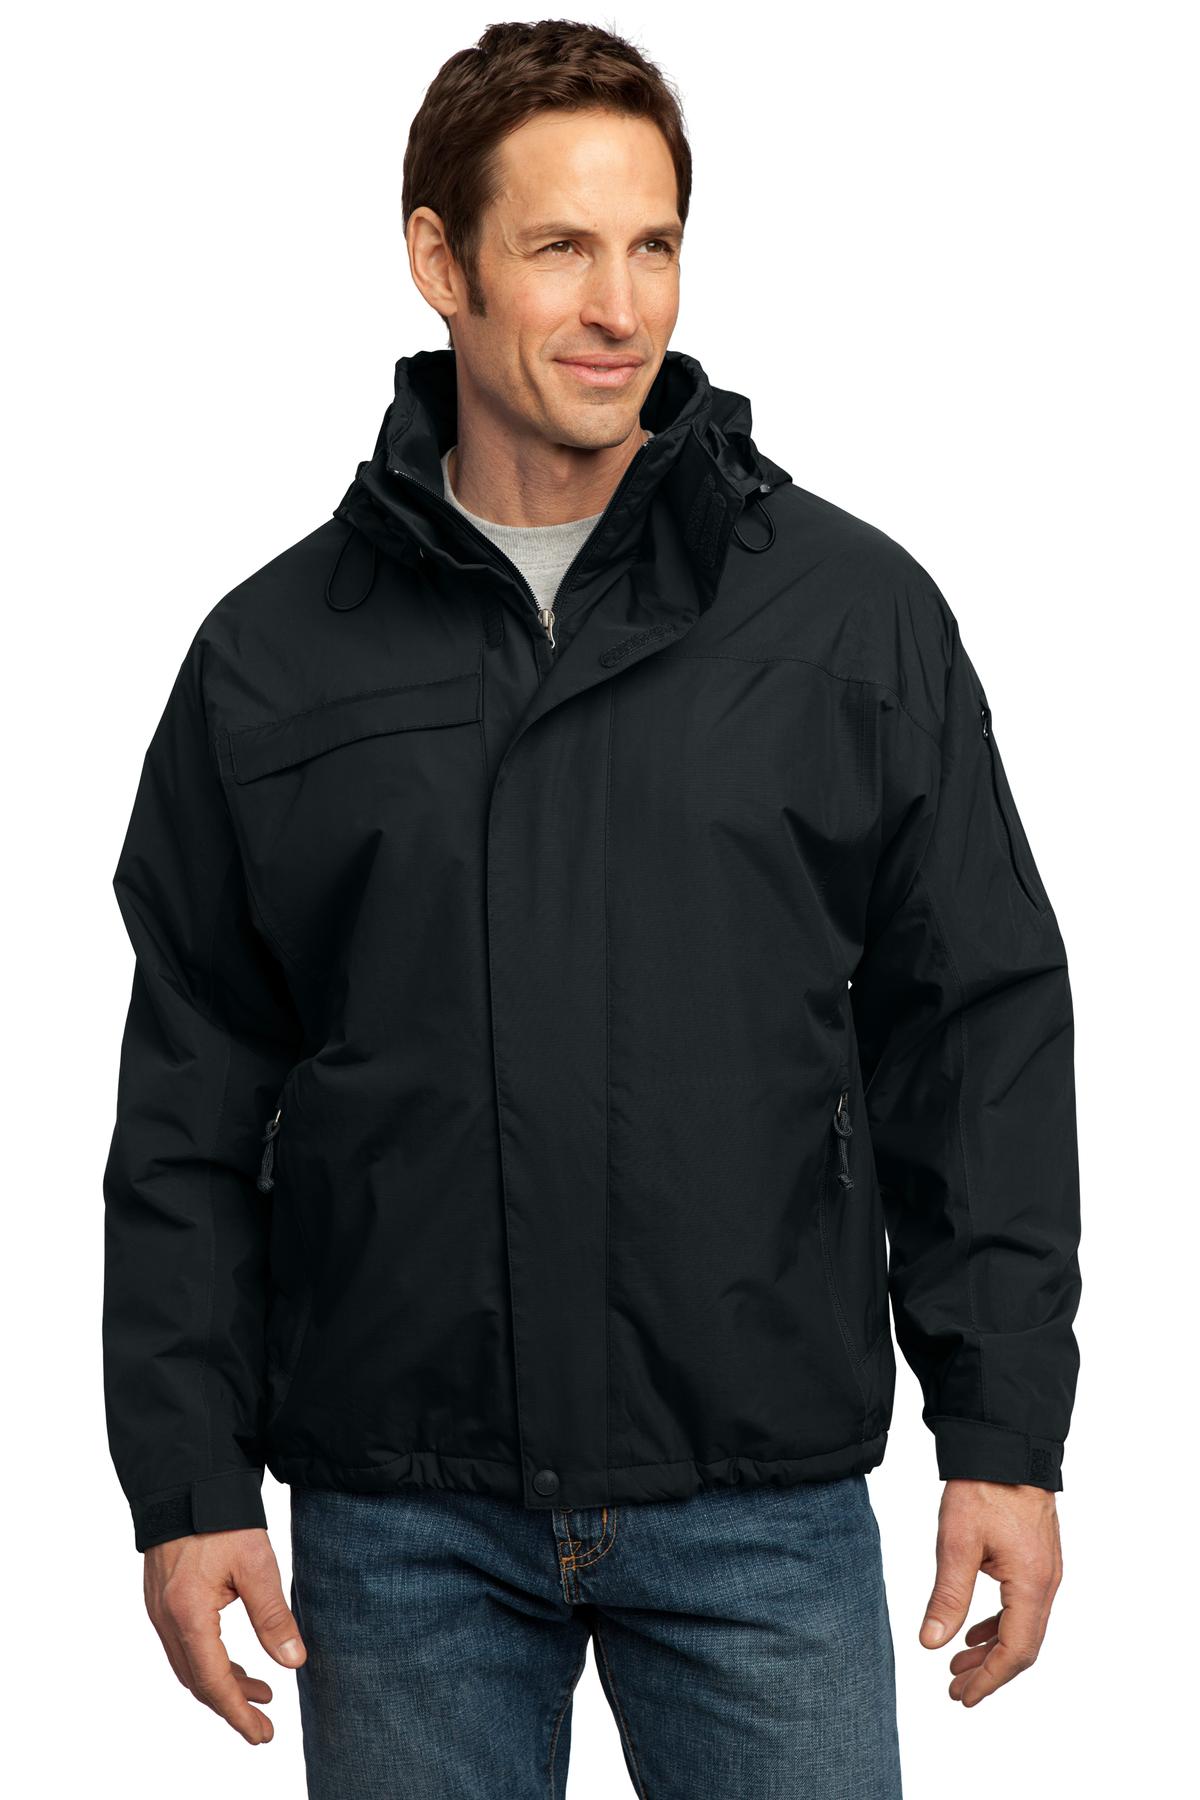 Port Authority Hospitality Tall Outerwear ® Tall Nootka Jacket.-Port Authority